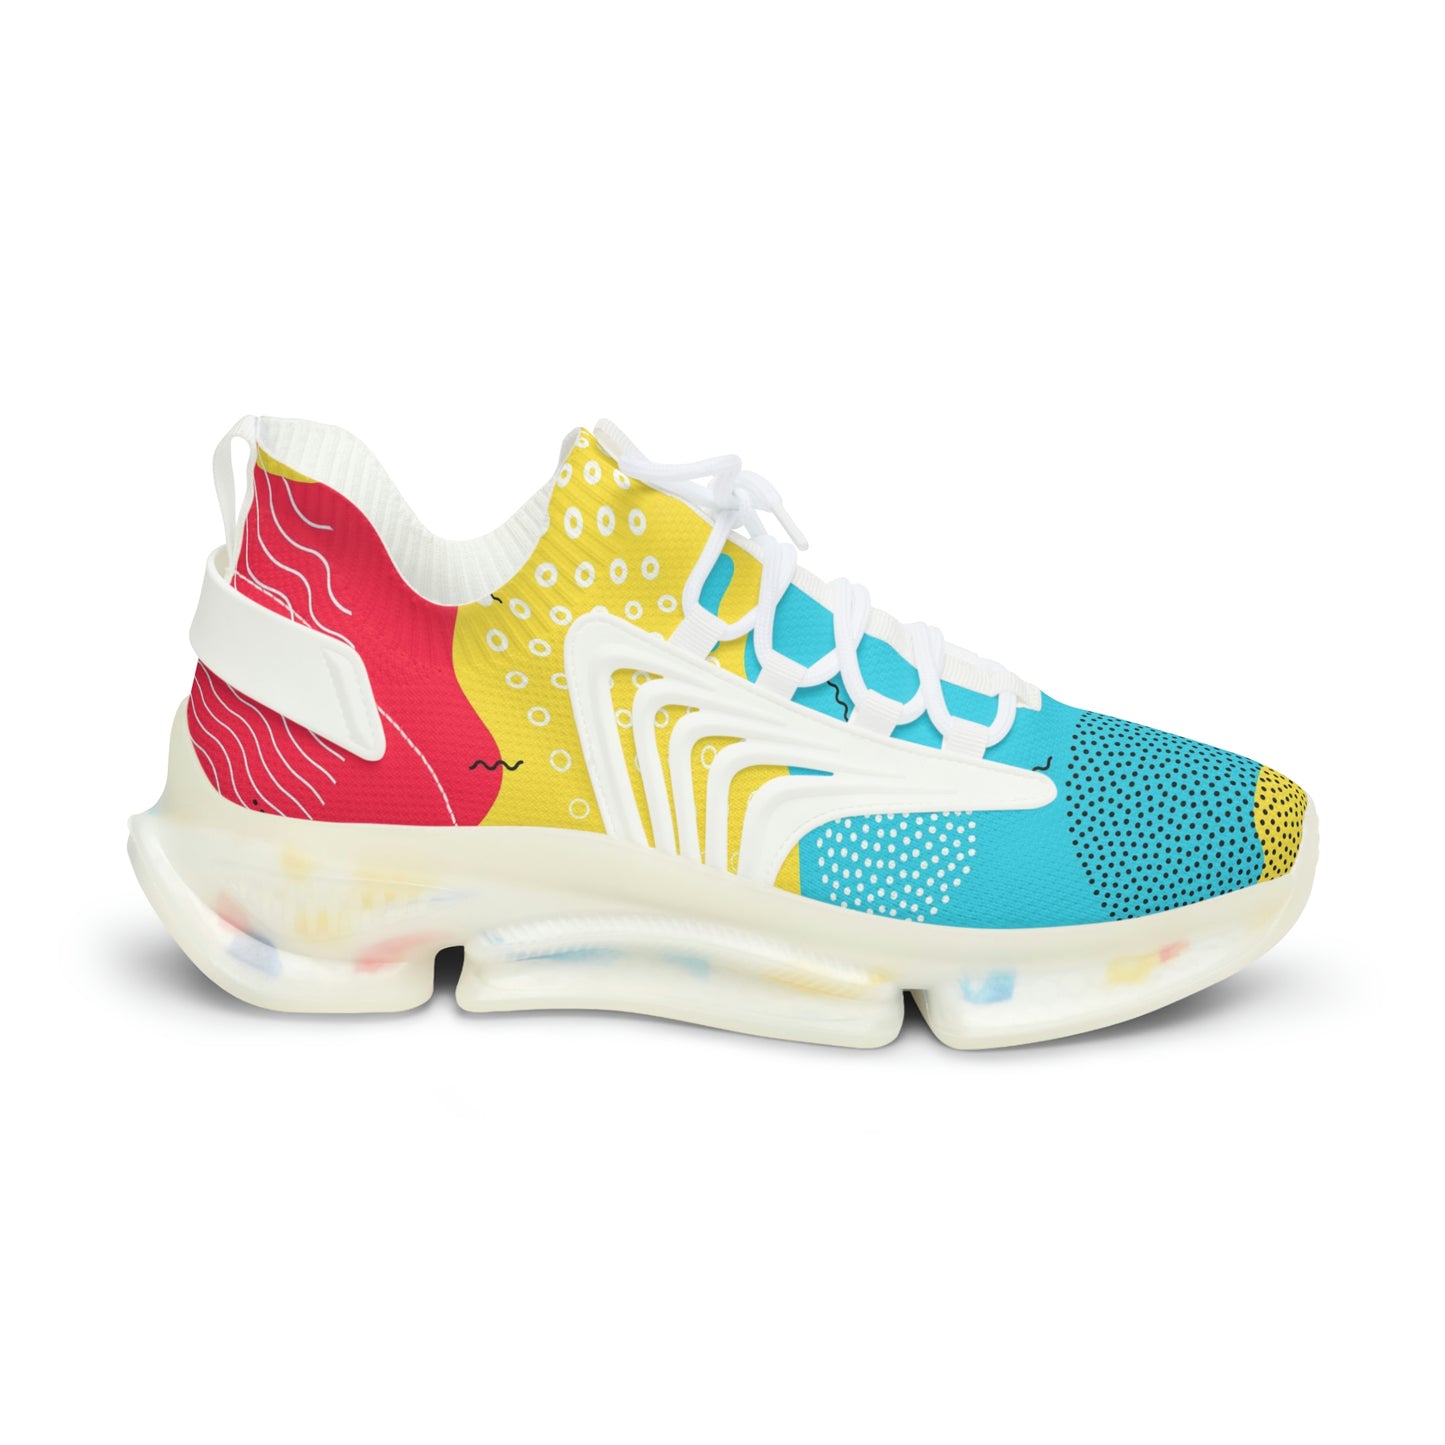 Red / Yellow / Blue - Men's Mesh Sports Sneakers